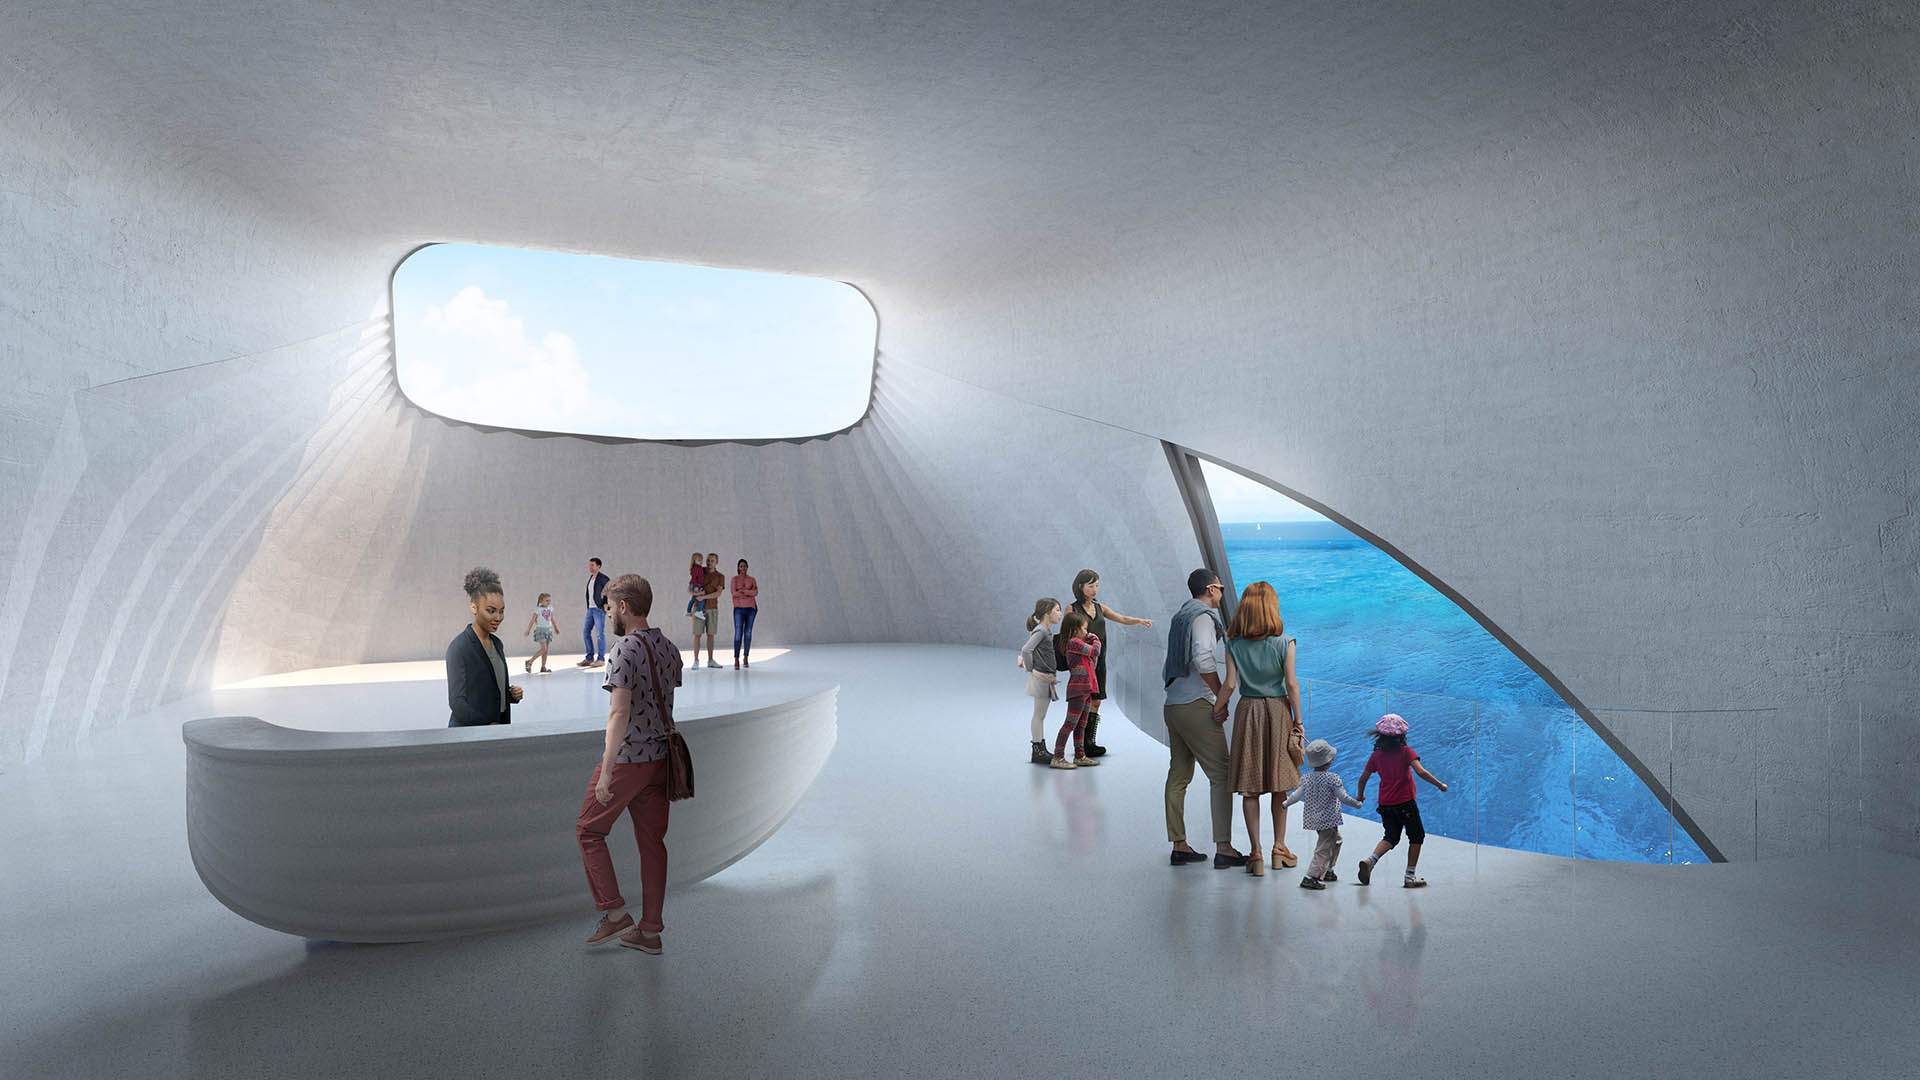 Australia Will Soon Be Home to a Whale-Shaped Underwater Observatory Two Kilometres Off the Coast